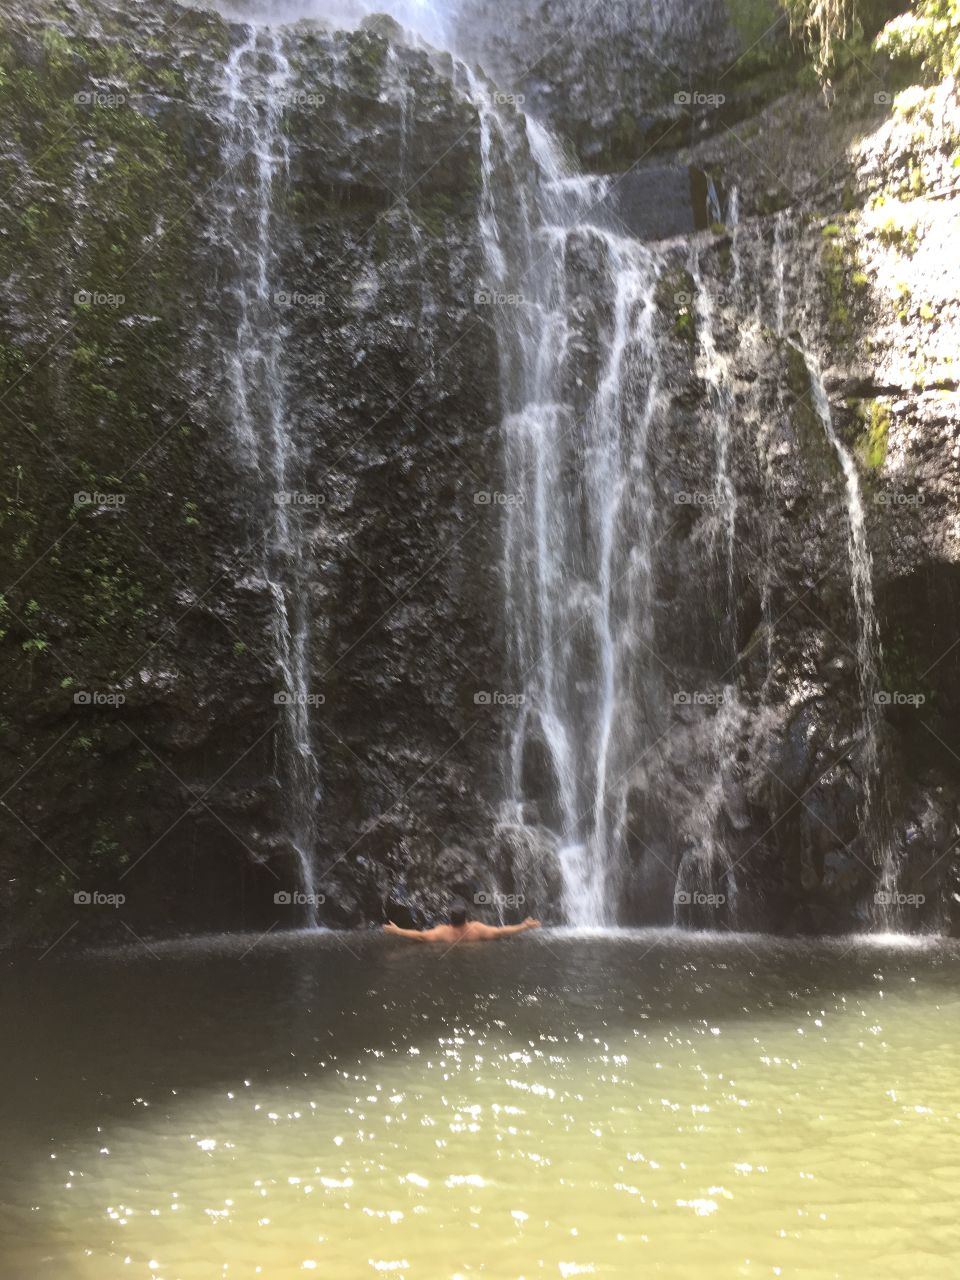 A quick dip in a large, cold, breathtaking waterfall found on our drive along side the Road to Hana in Maui, Hawaii. 